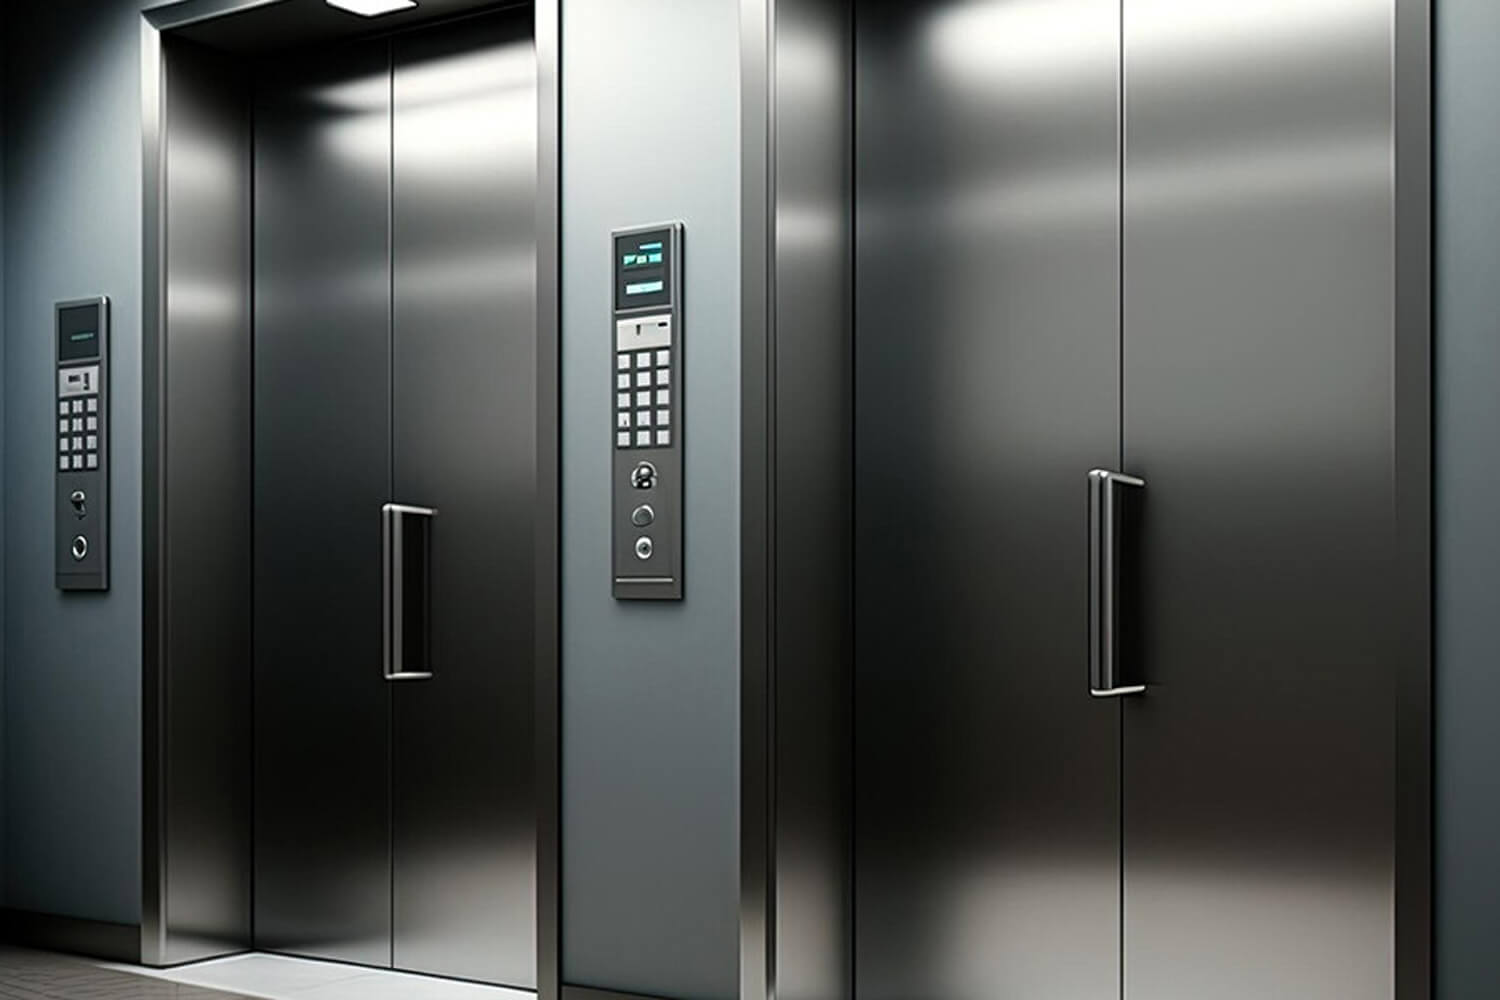 4 Elevator Upgrades - Tips for Commercial Building Owners